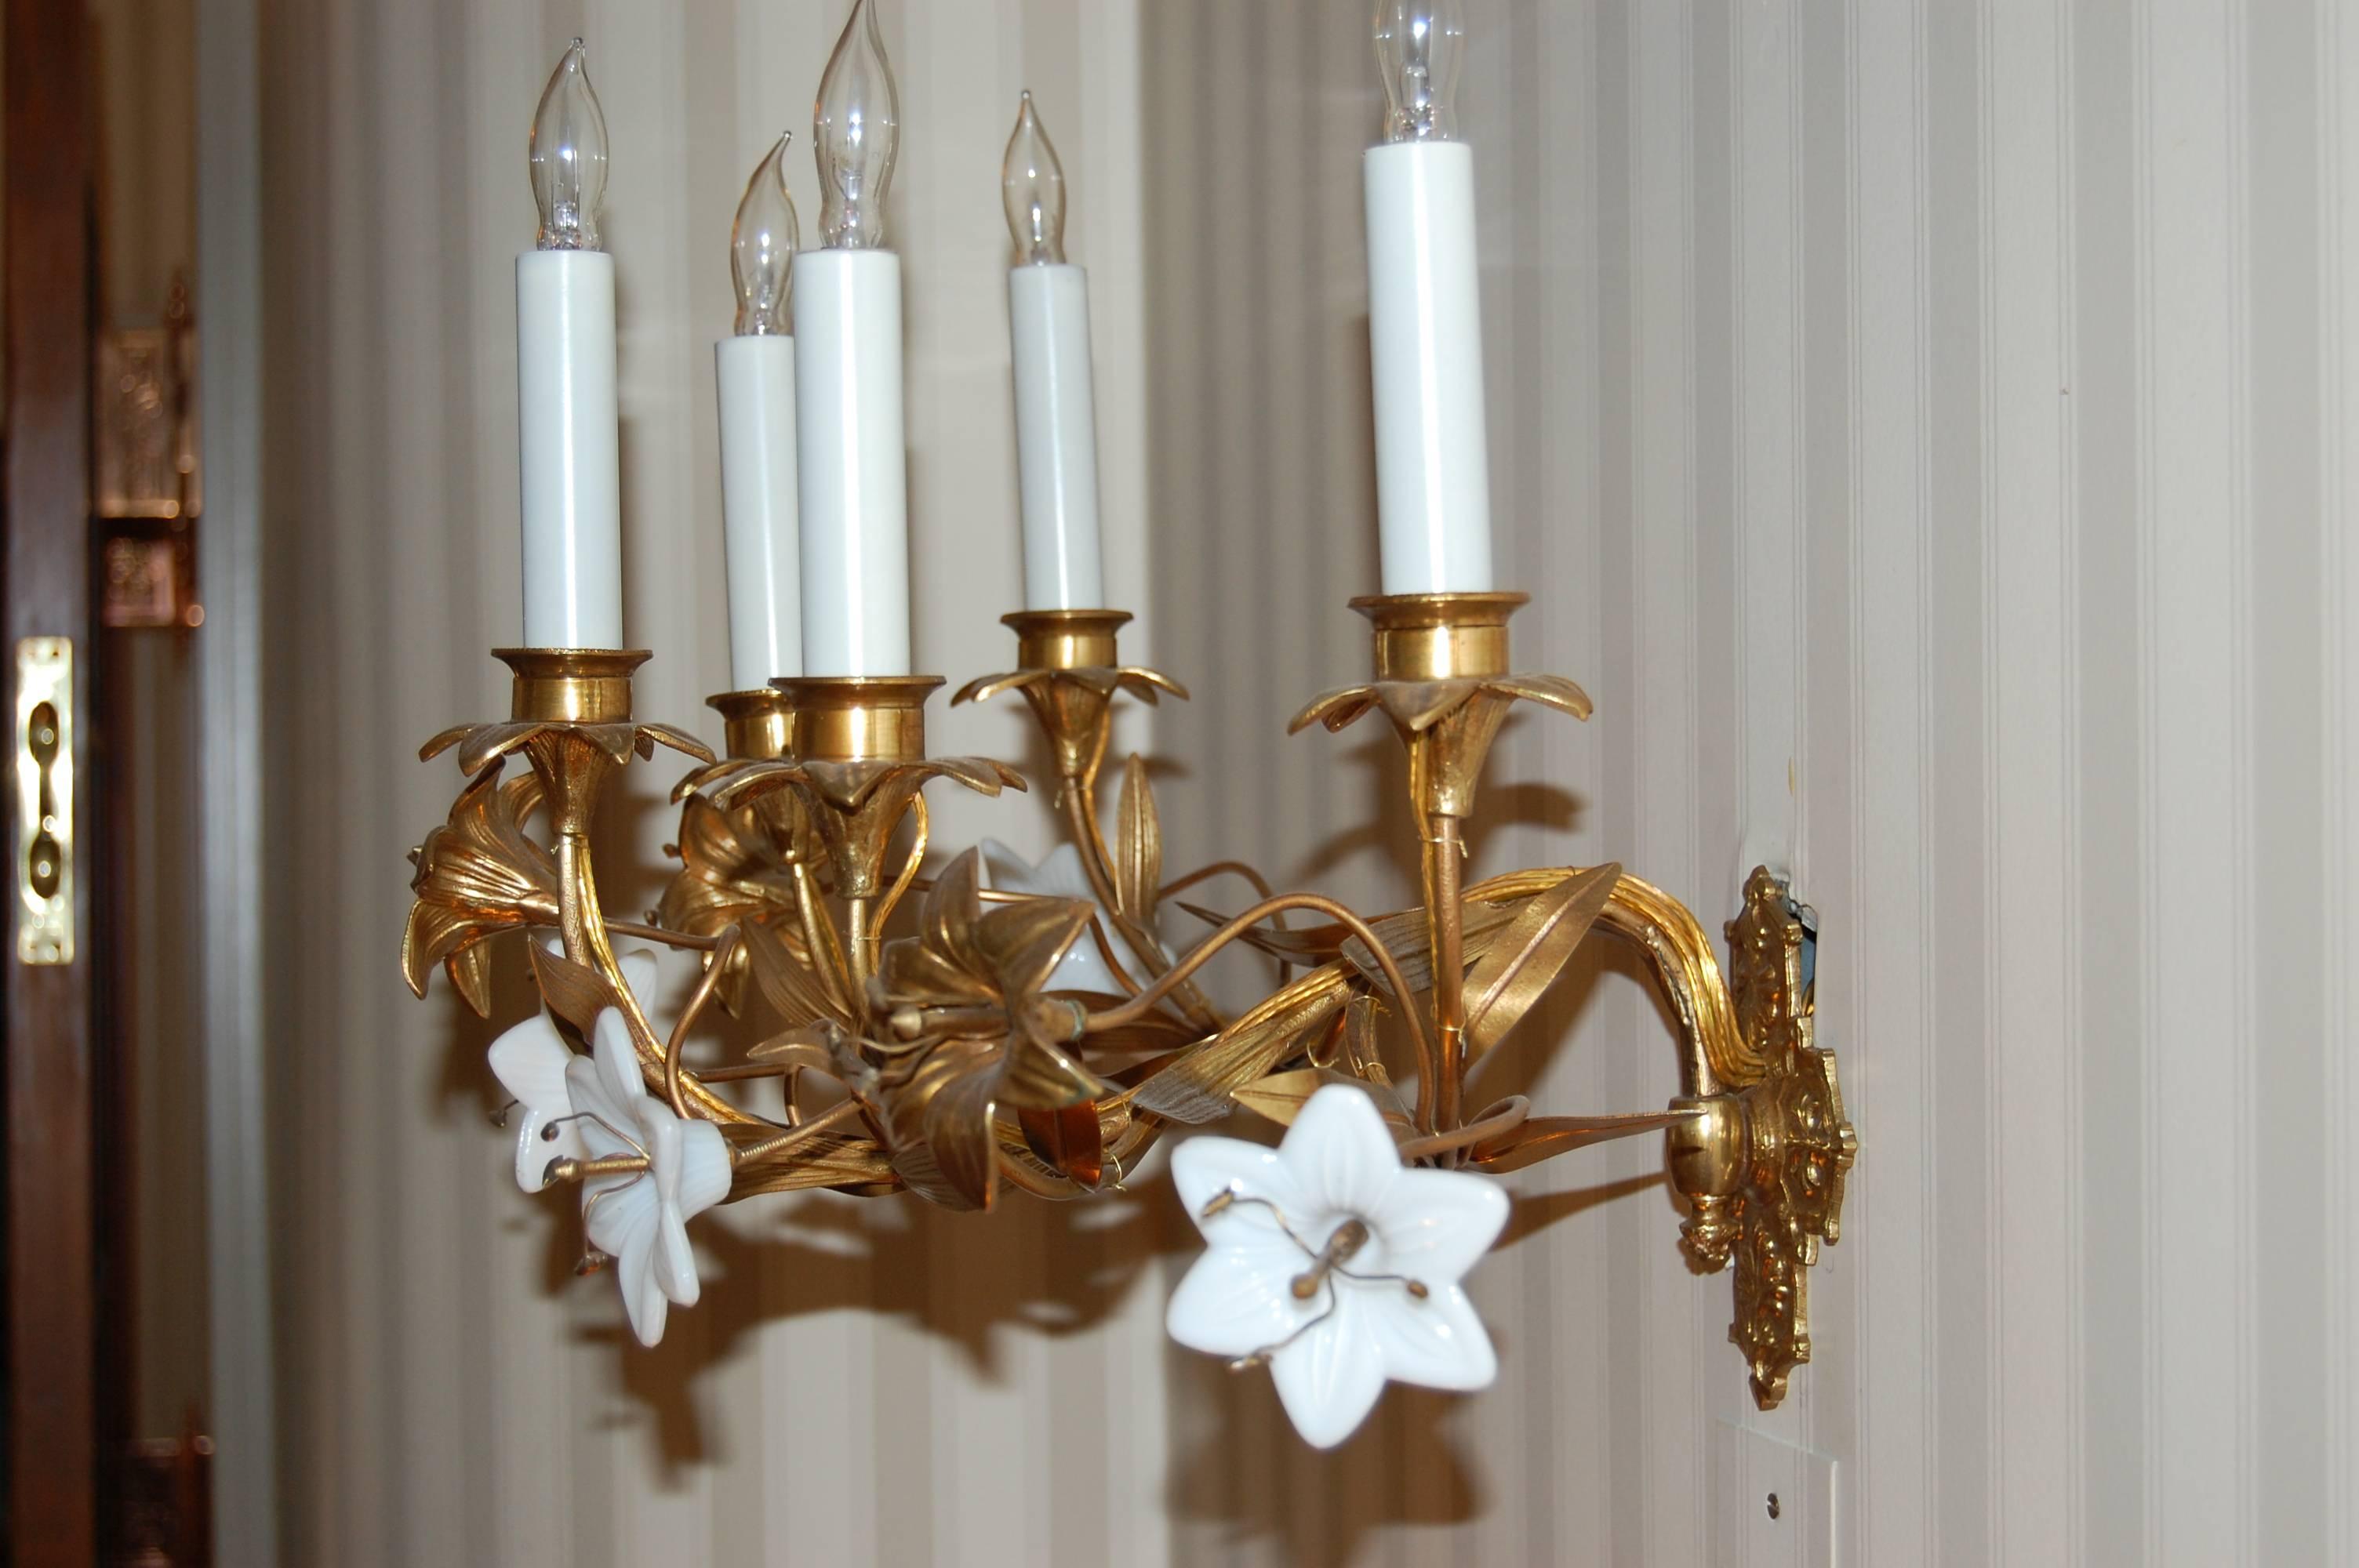 Cast Pair of Early 19th Century Five-Light French Lily Sconces with Glass Flowers For Sale